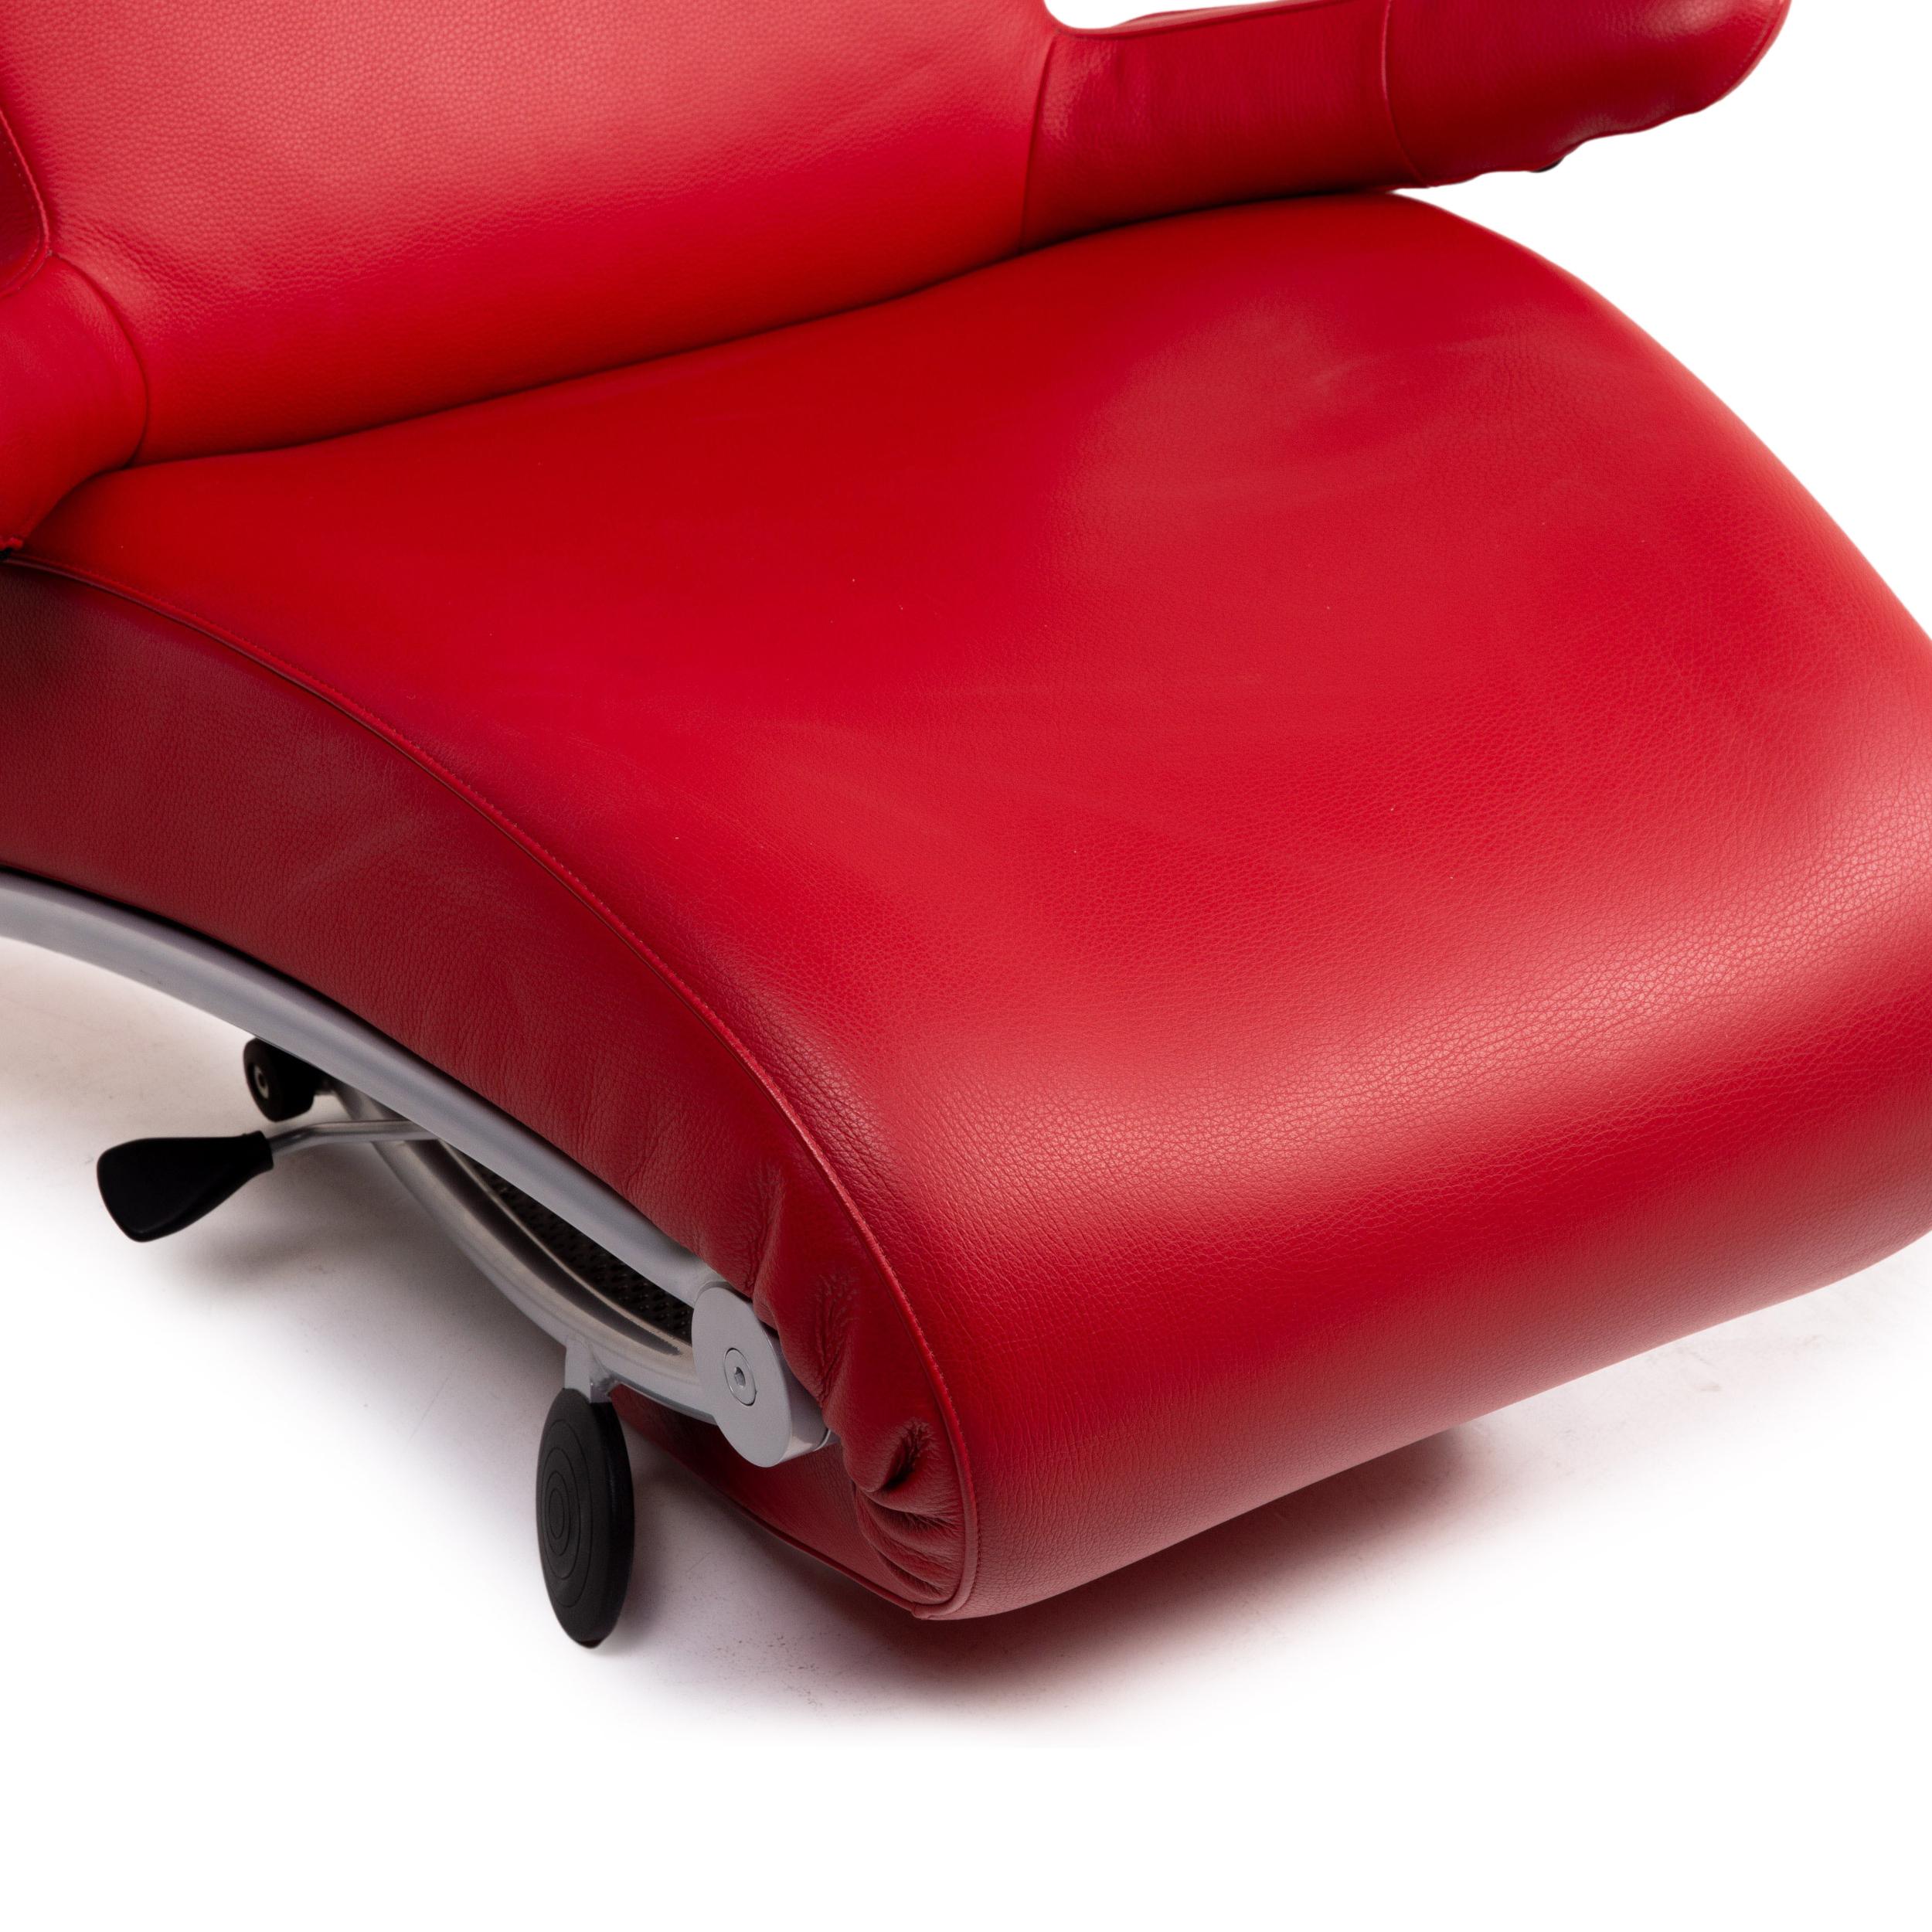 European WK Wohnen Solo 699 Leather Armchair Red Lounger Relaxation Function